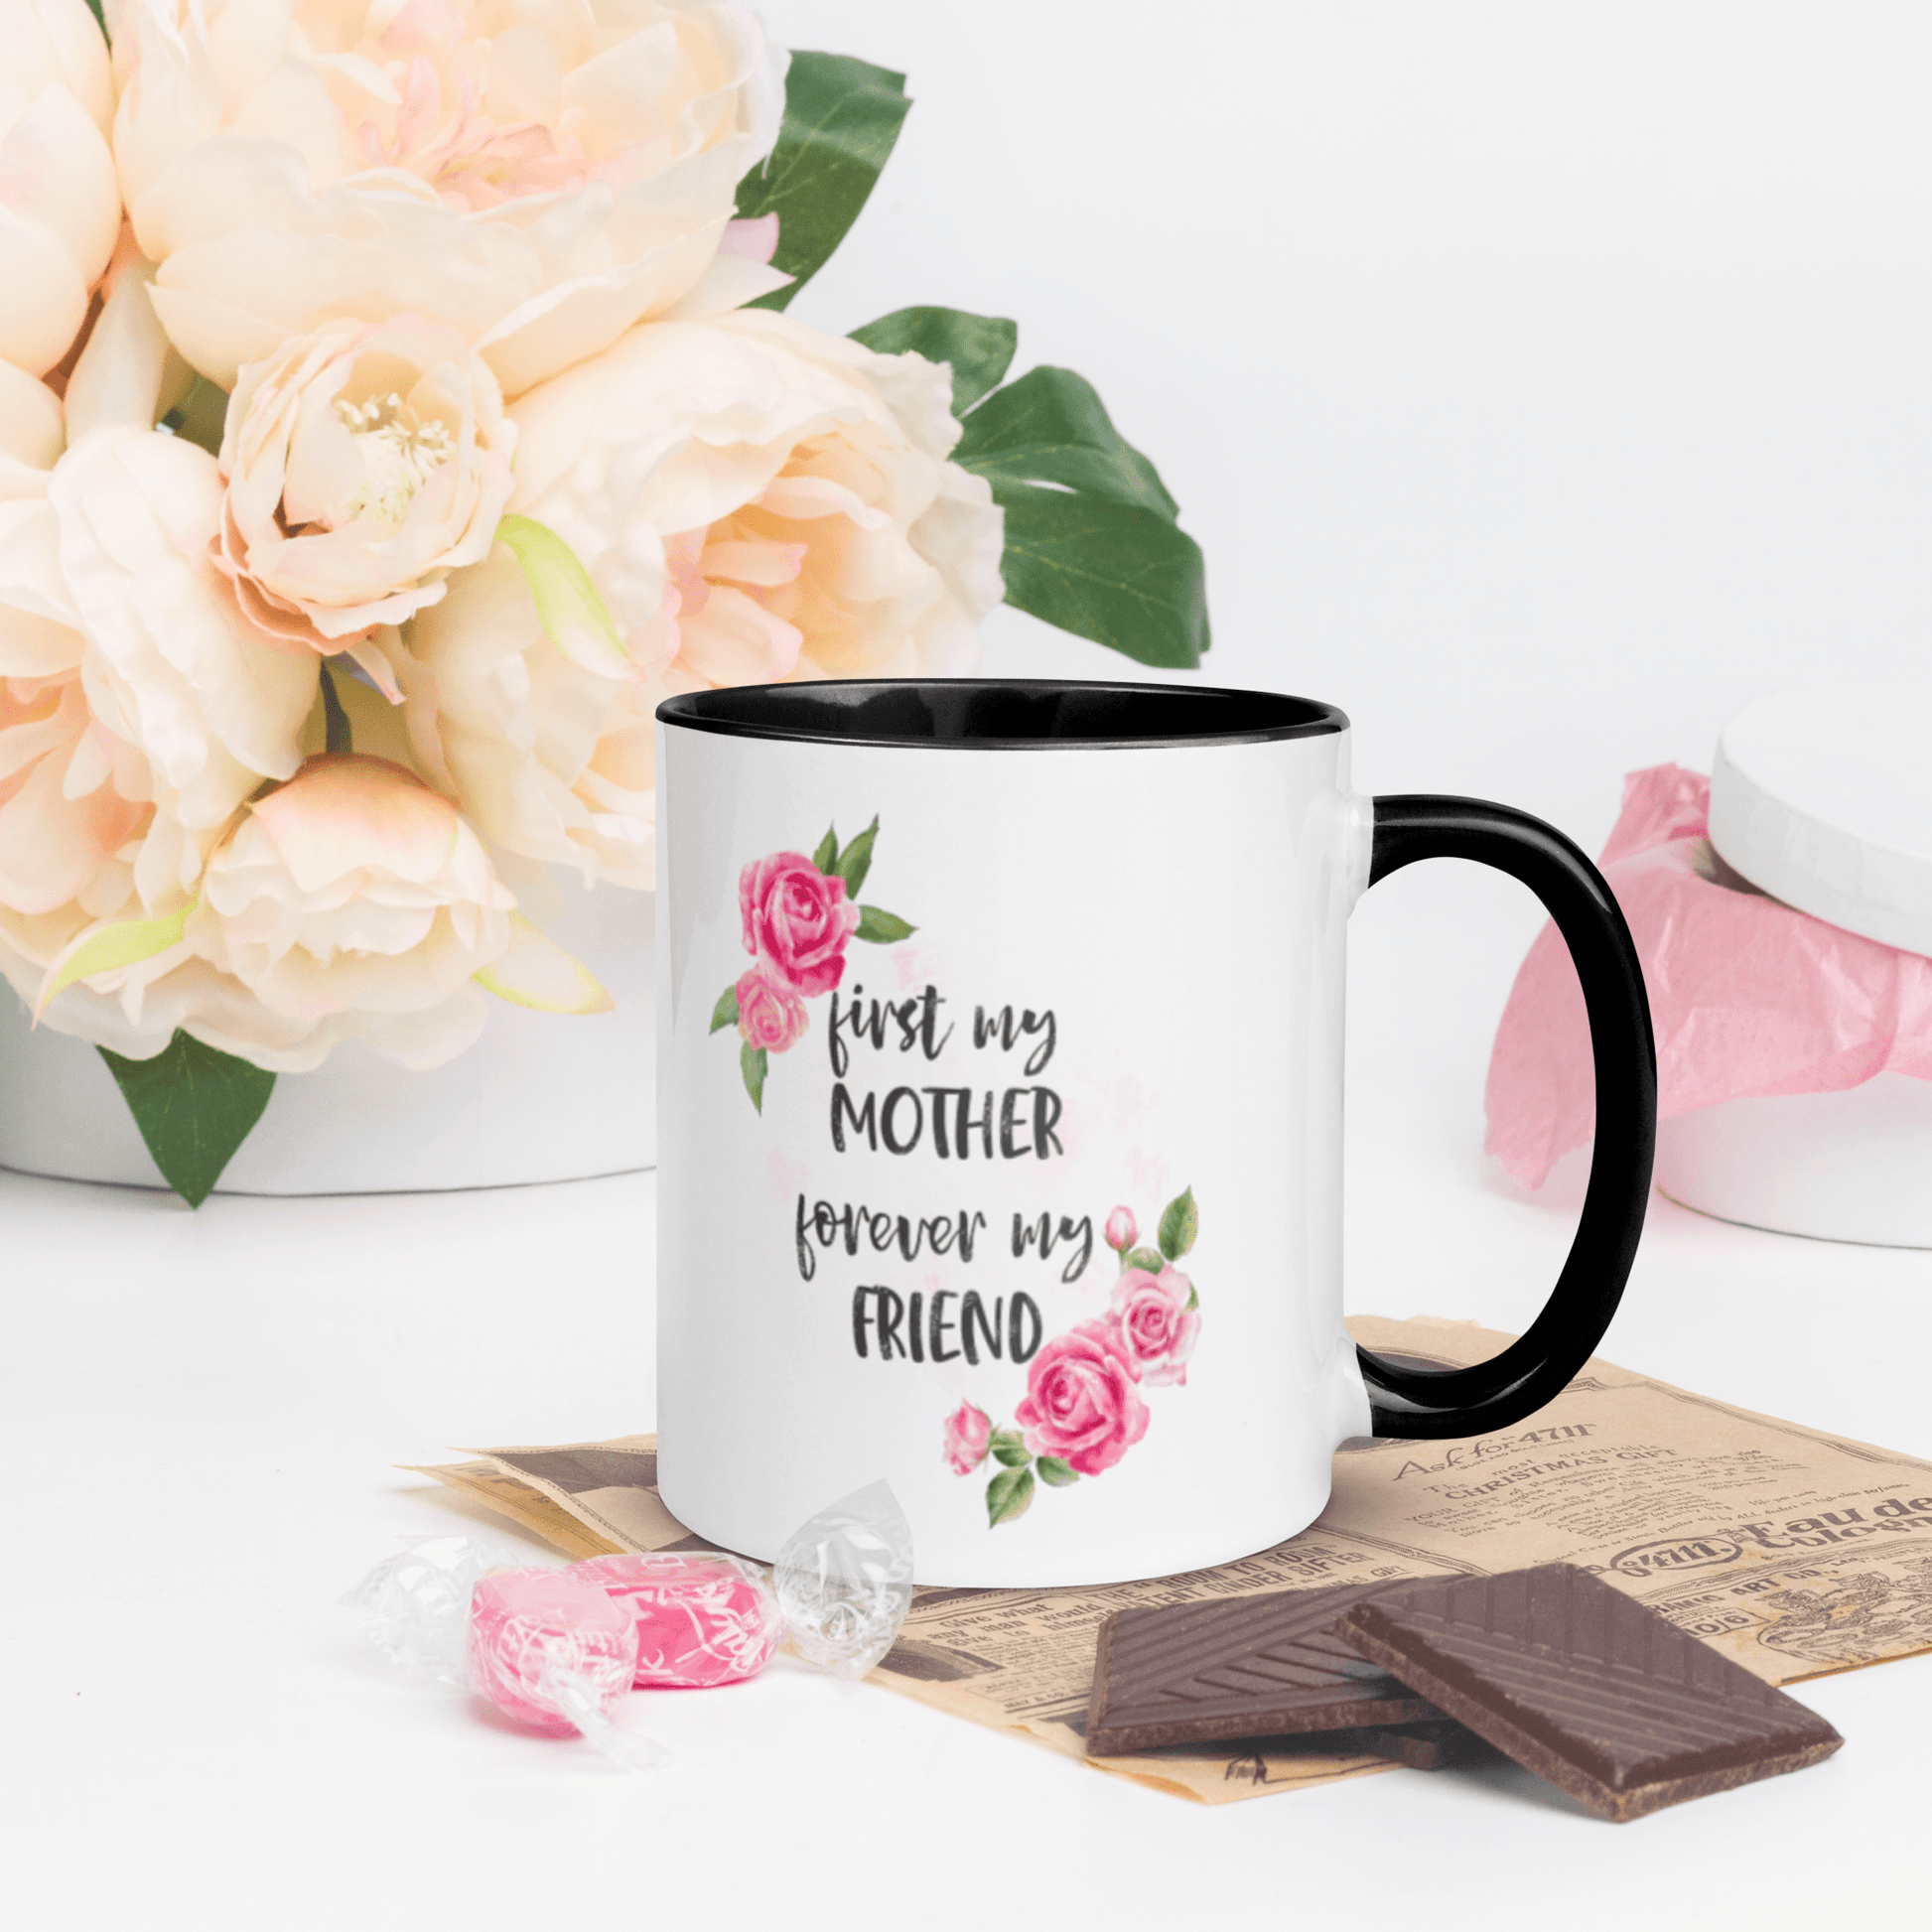 First my Mother, Forever My Friend ❤️ Ceramic Mug with Color Accent (Available in Various Colors!) - The Grateful Hearts